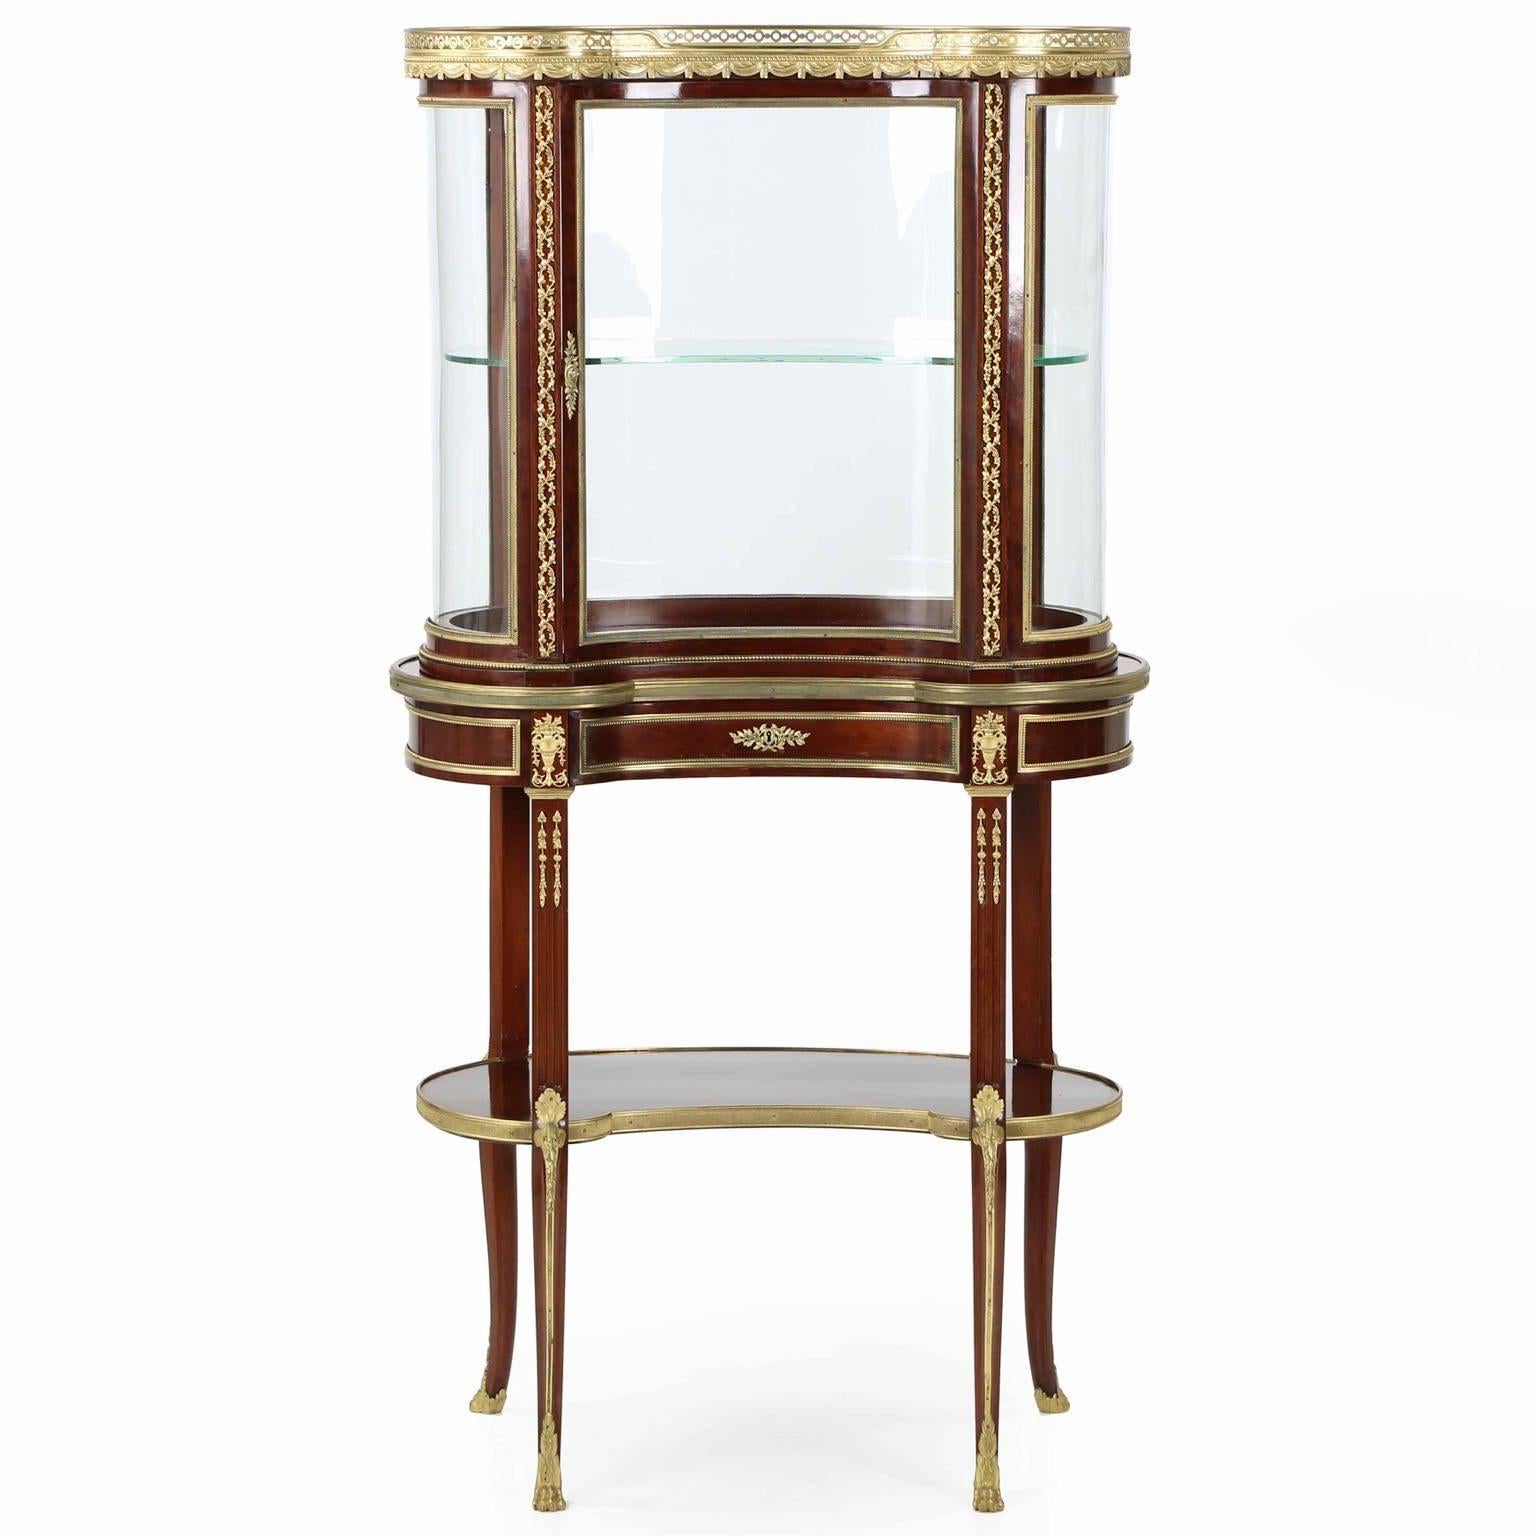 A work of incredible discipline and demanding attention to detail, this inordinately fine vitrine of the Bell Epoque is a statement piece in every way. Deep pure grain mahogany primary surfaces retain their brilliant ruby hues under a French polish,